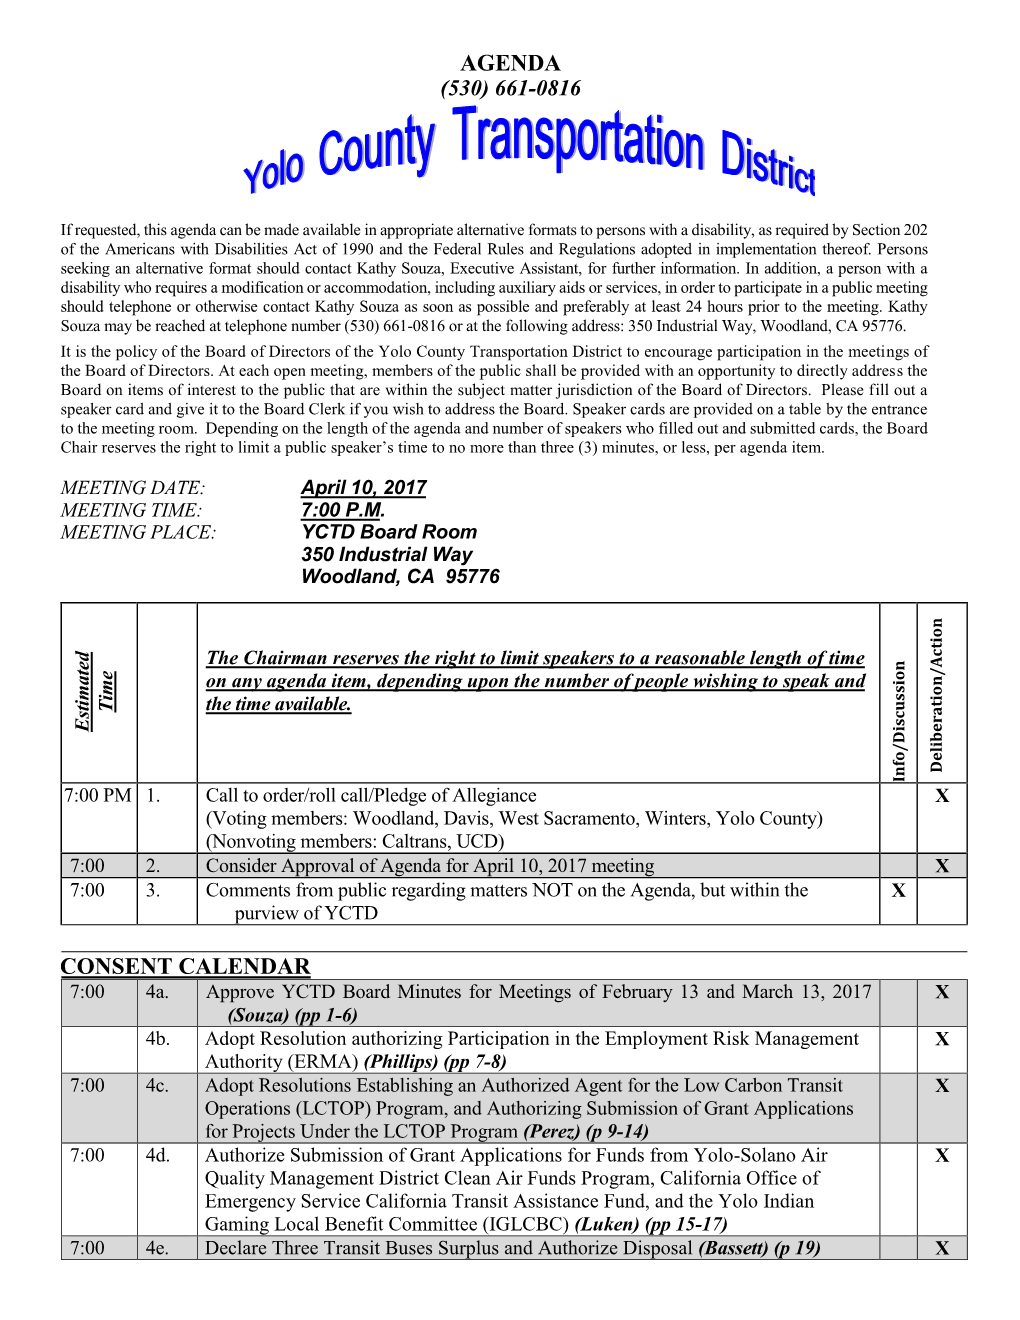 Yolo County Transportation District to Encourage Participation in the Meetings of the Board of Directors